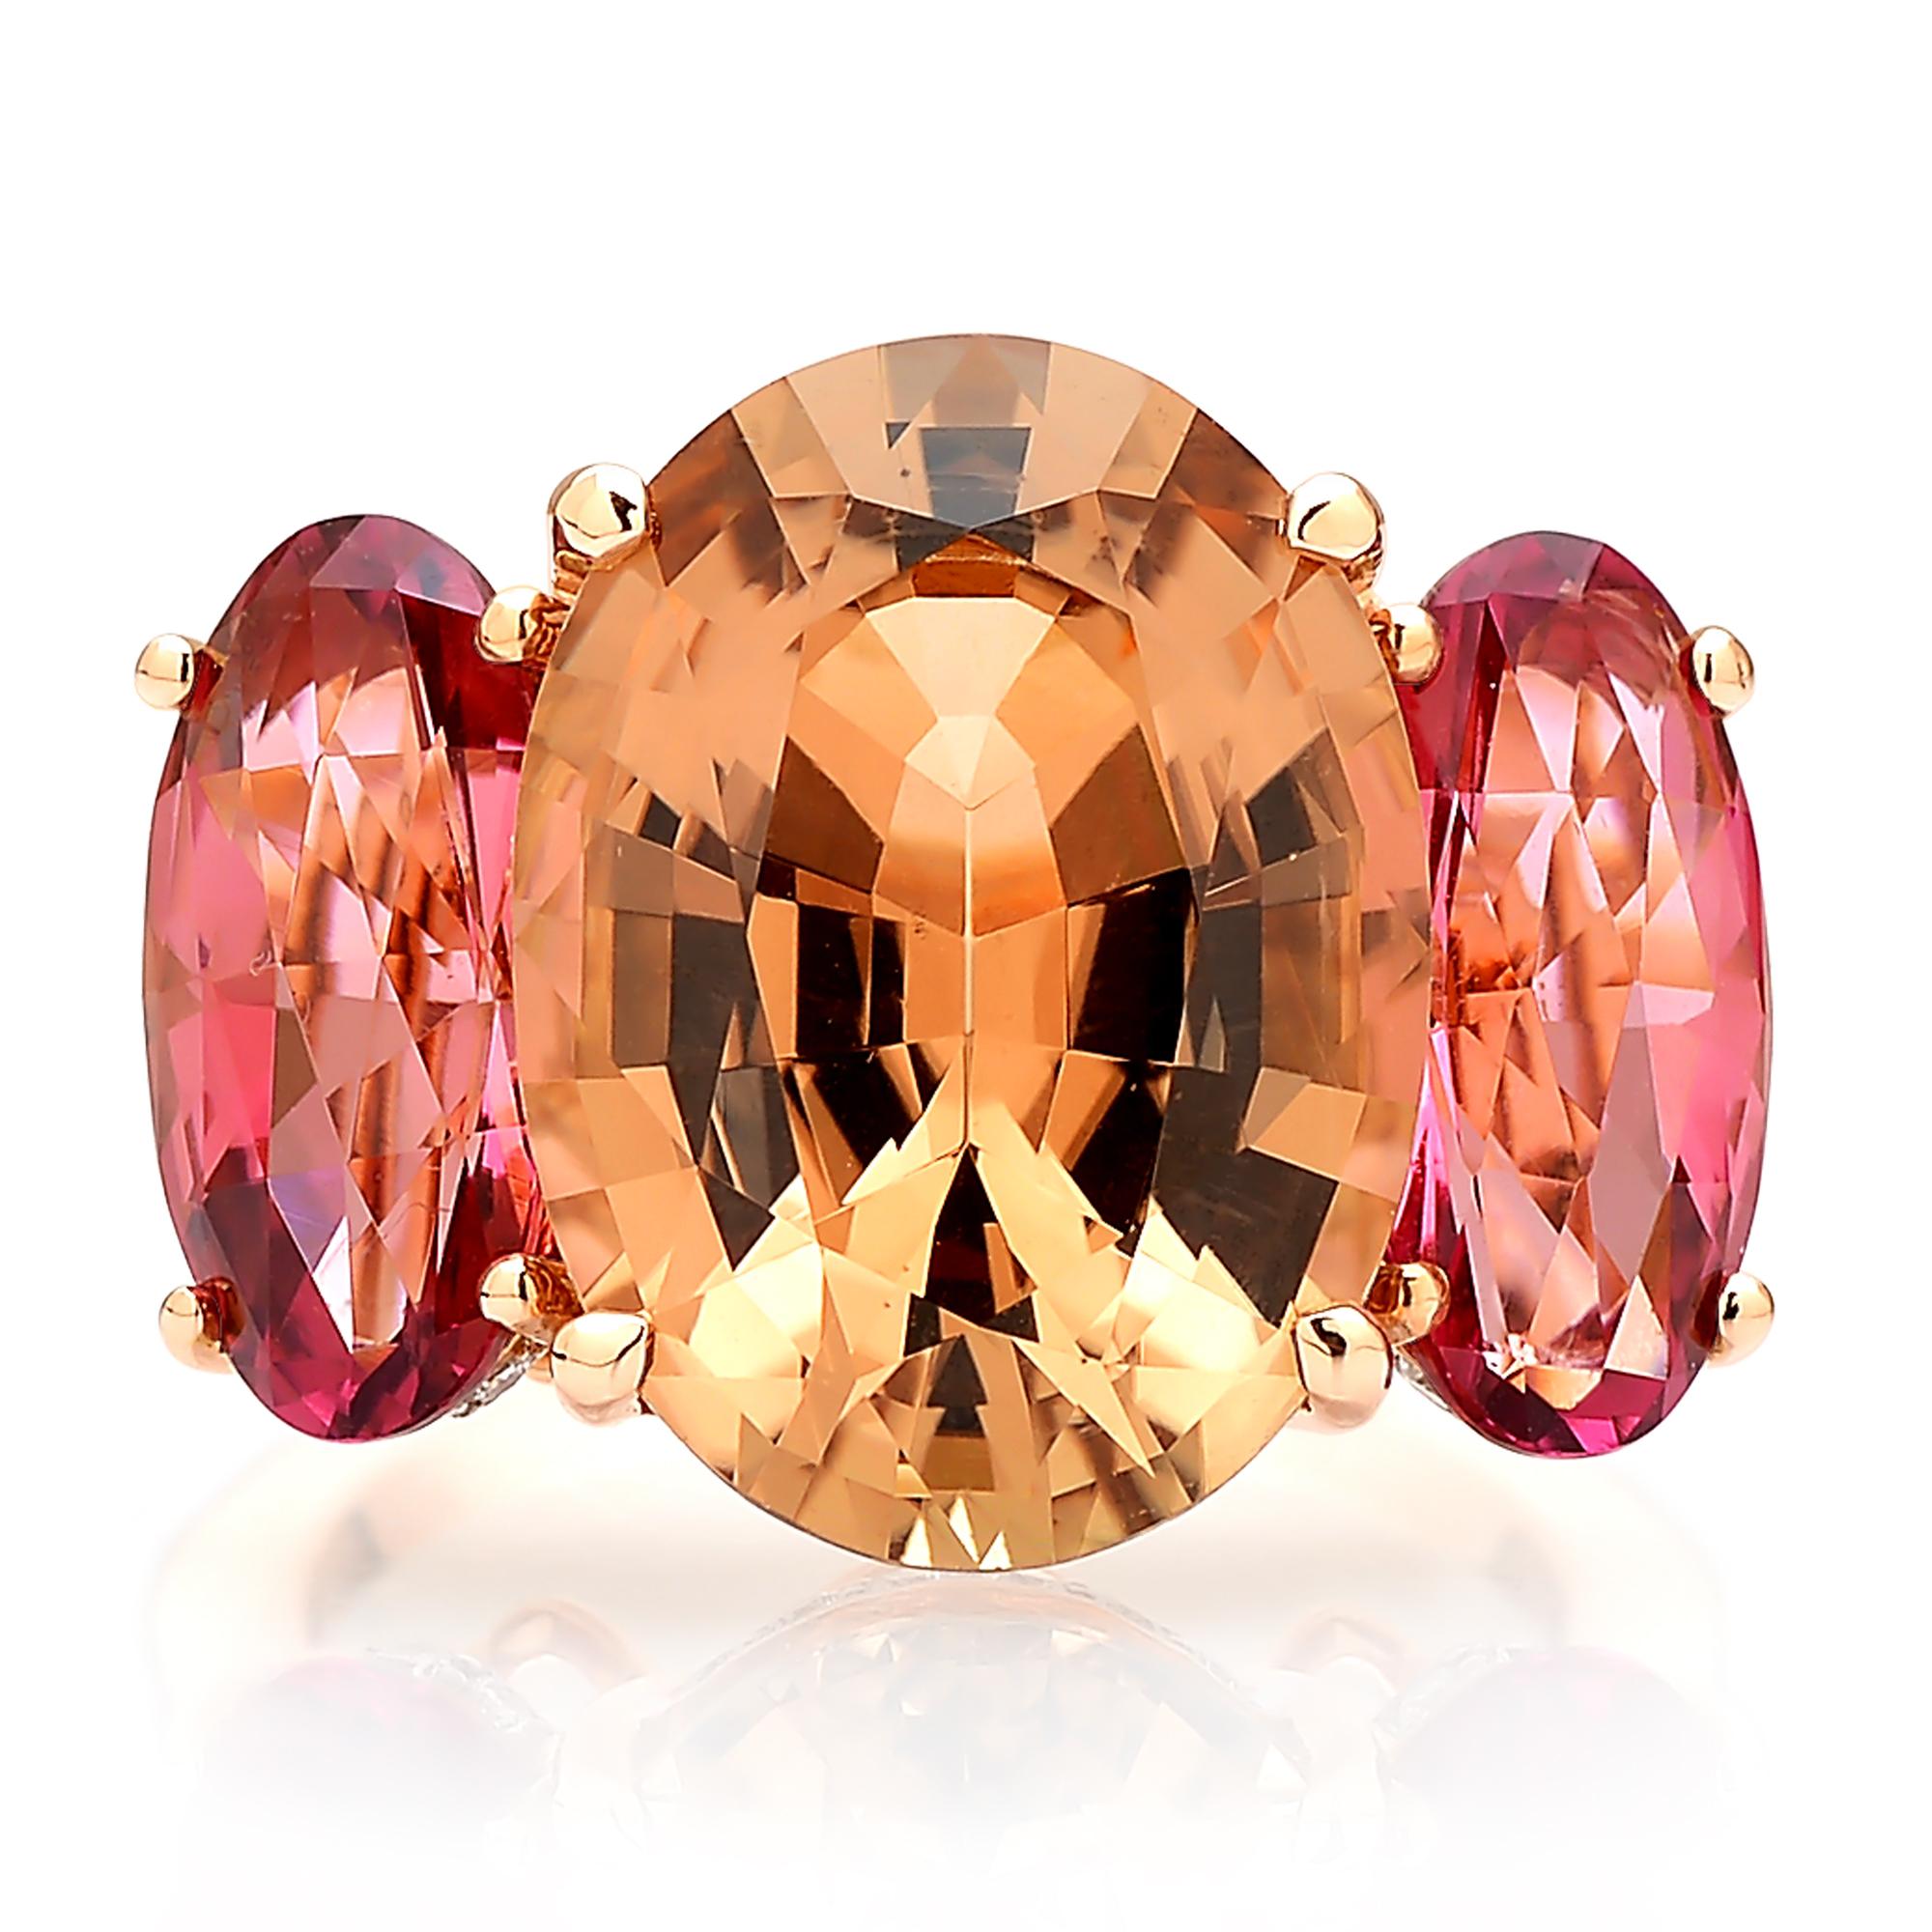 Oval Cut Paolo Costagli 18KT Rose Gold Champagne and Pink Tourmaline Ring with Diamond